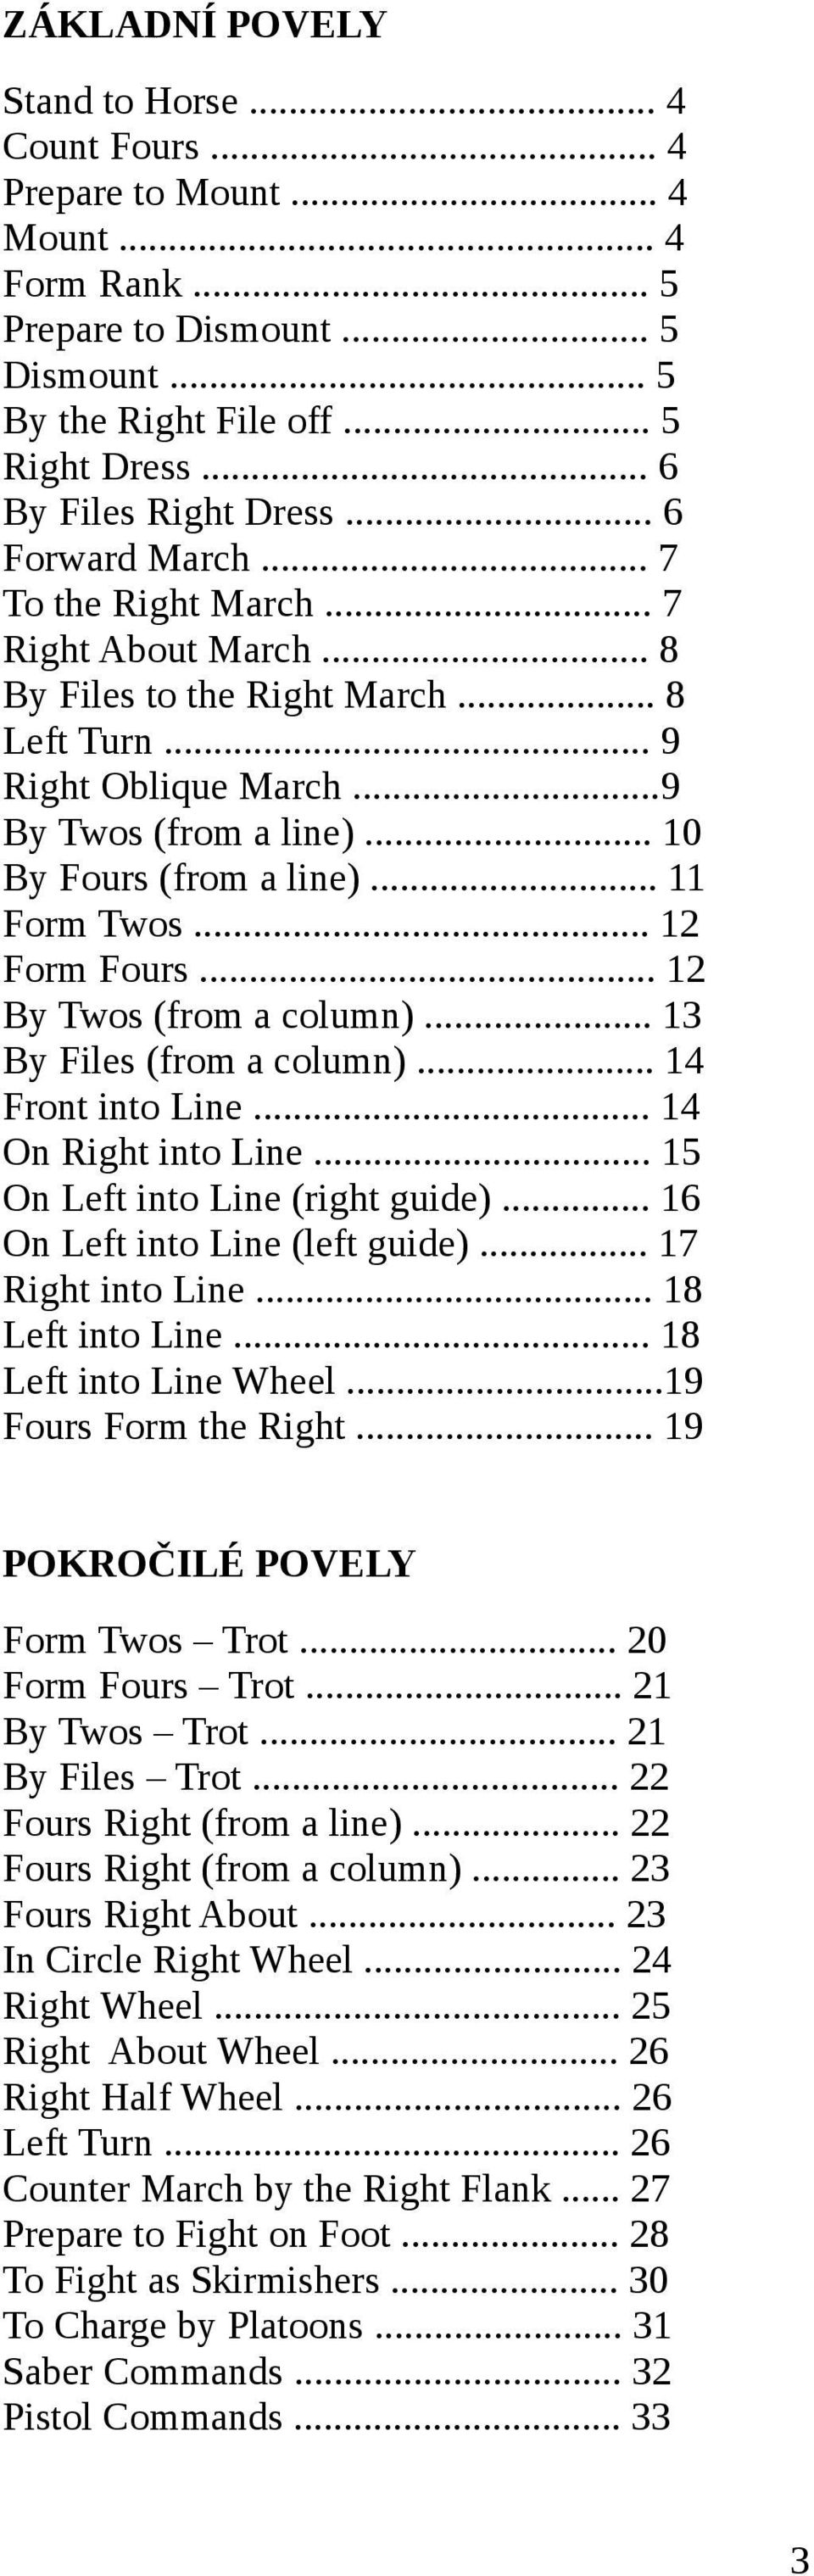 .. 10 By Fours (from a line)... 11 Form Twos... 12 Form Fours... 12 By Twos (from a column)... 13 By Files (from a column)... 14 Front into Line... 14 On Right into Line.